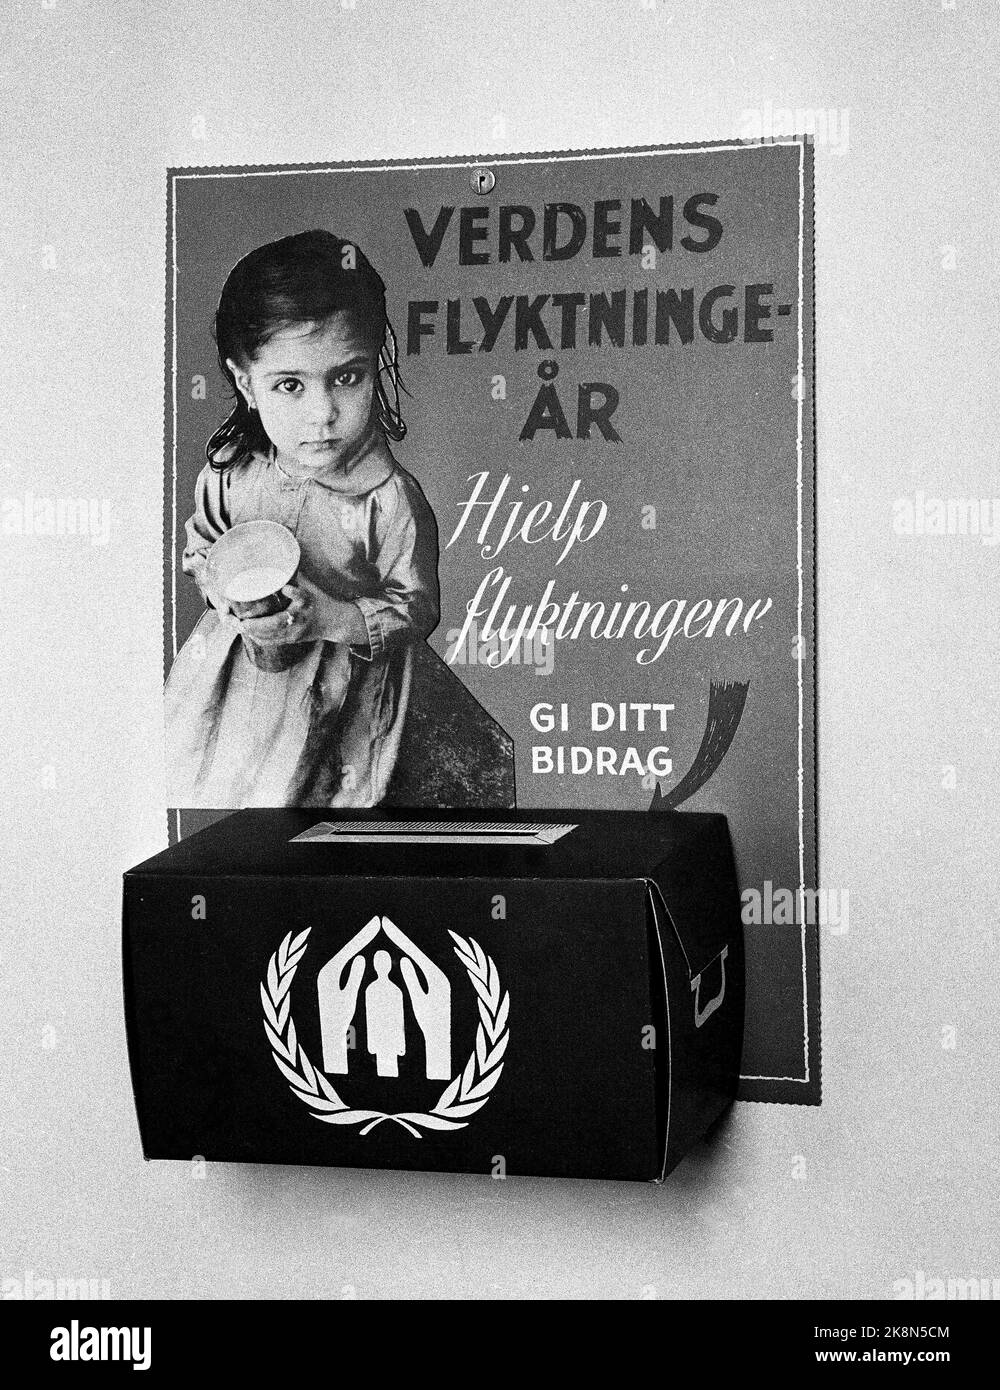 Oslo 19590916 UN 1959/1960 proclaimed the world's refugee year, and throughout the world, various fundraising campaigns were underway. Here is a collection box with a picture of a refugee child, and with the UN High Commissioner for Refugees' logo. Photo: NTB / NTB Stock Photo